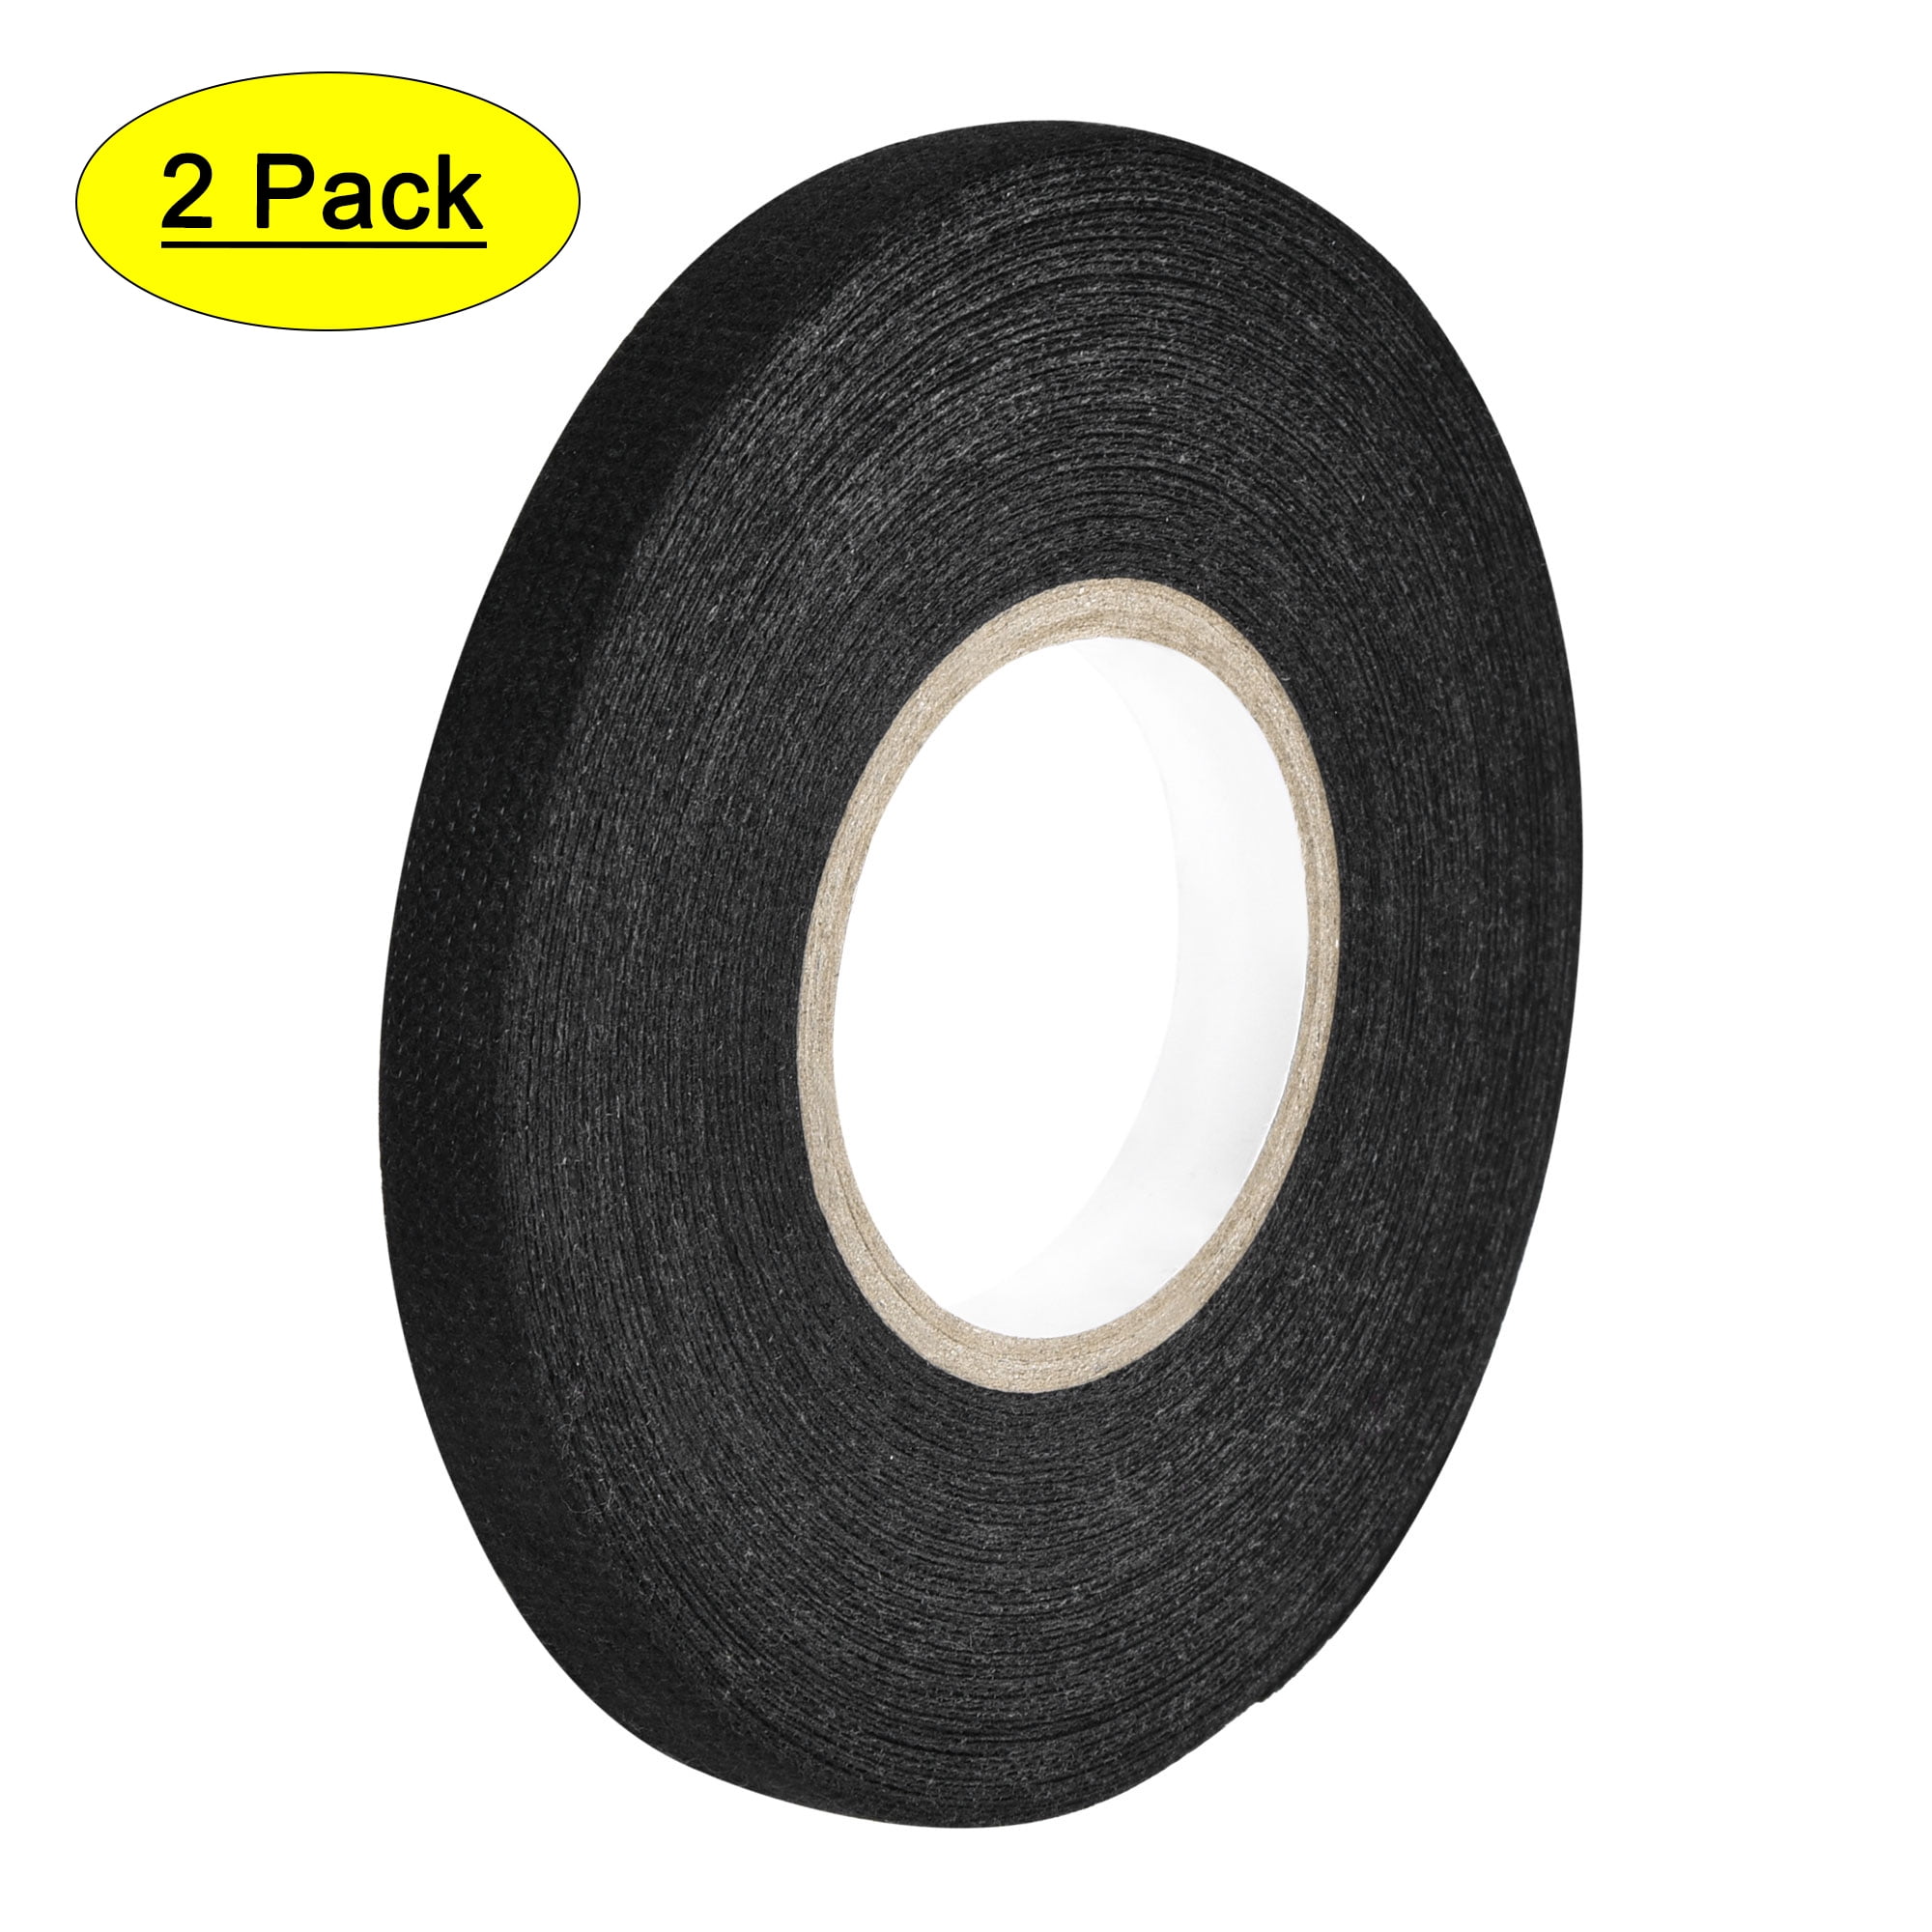 Adhesive Cloth Fabric Tape Wire Harness Looms Single-Side 9mm x 15m Black 